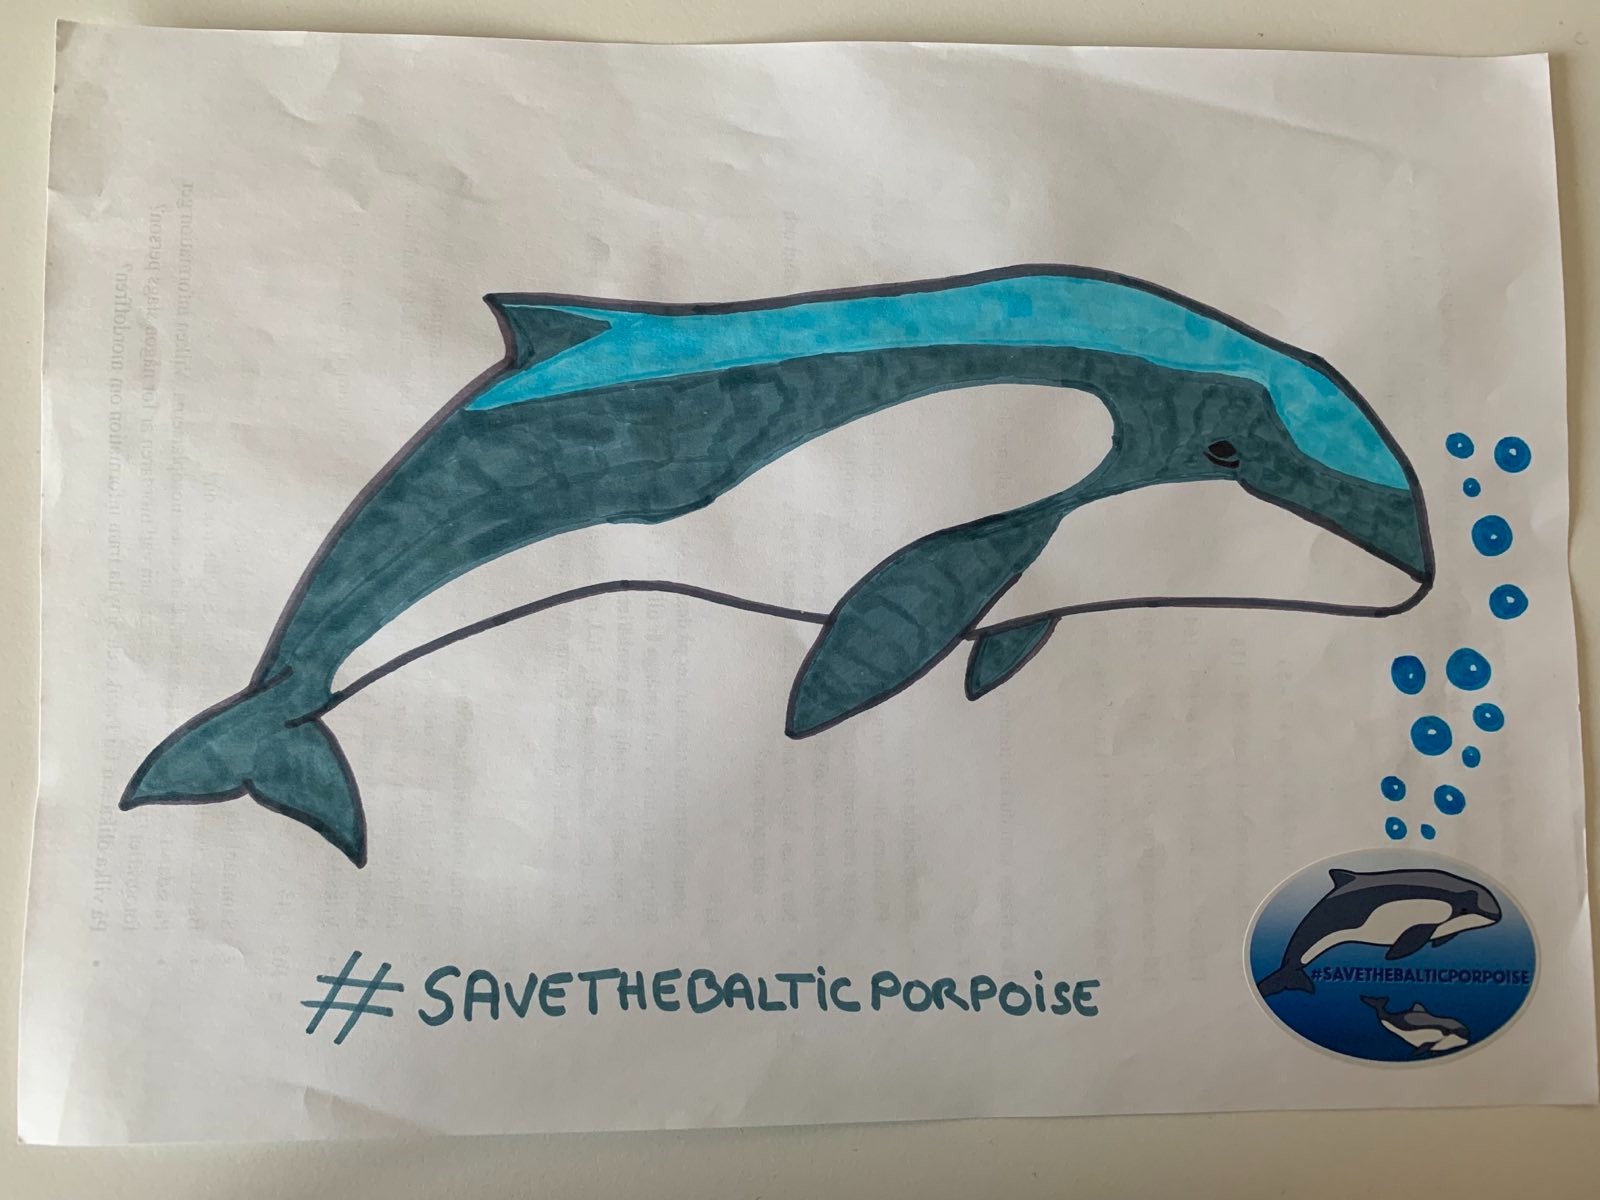 Drawing of a blue porpoise, with the #SaveTheBalticPorpoise hashtag